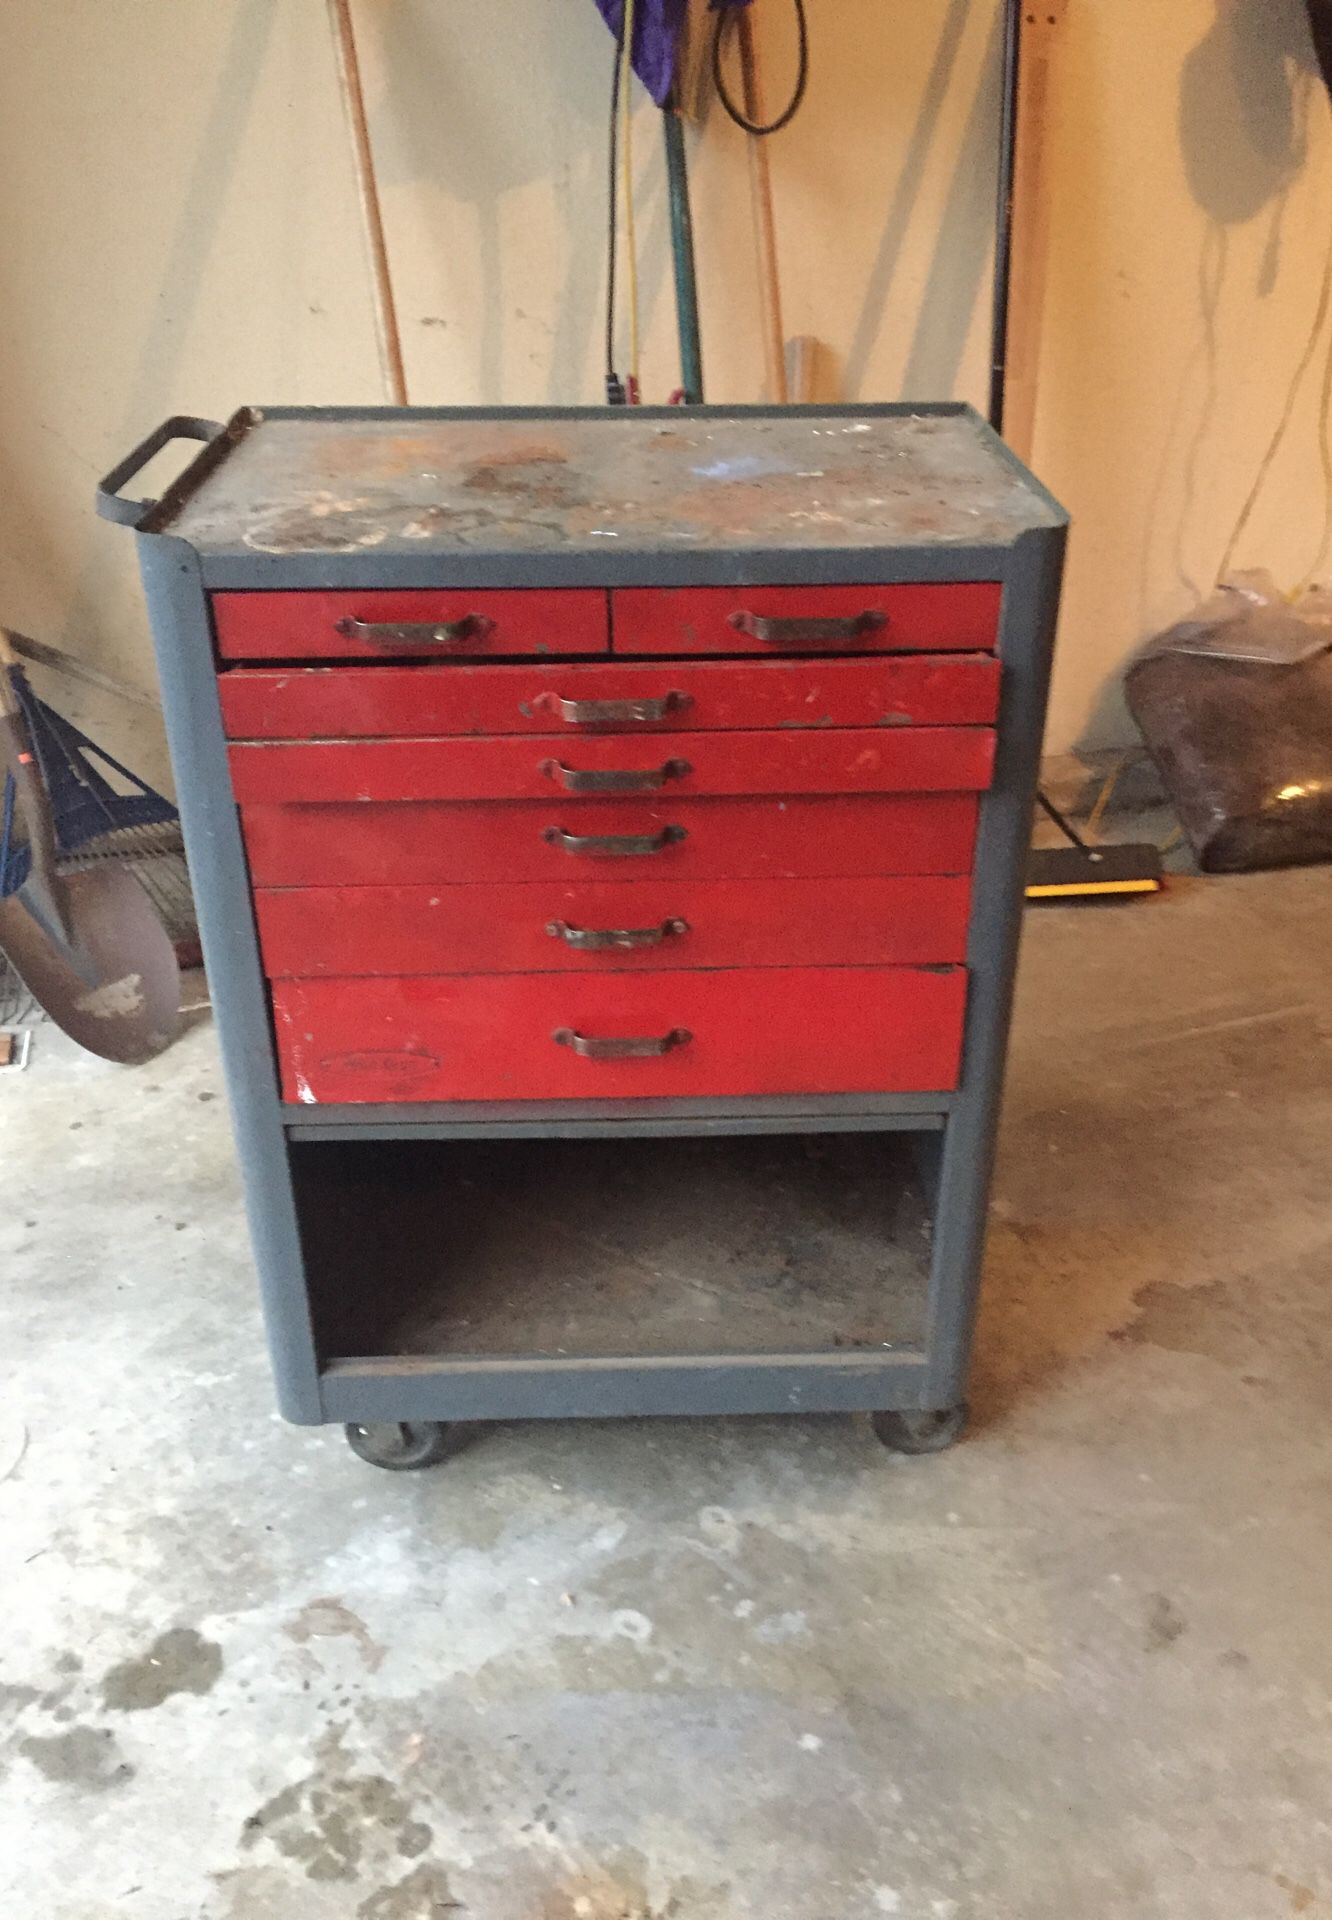 FREE tool chest on wheels. PENDING PICKUP